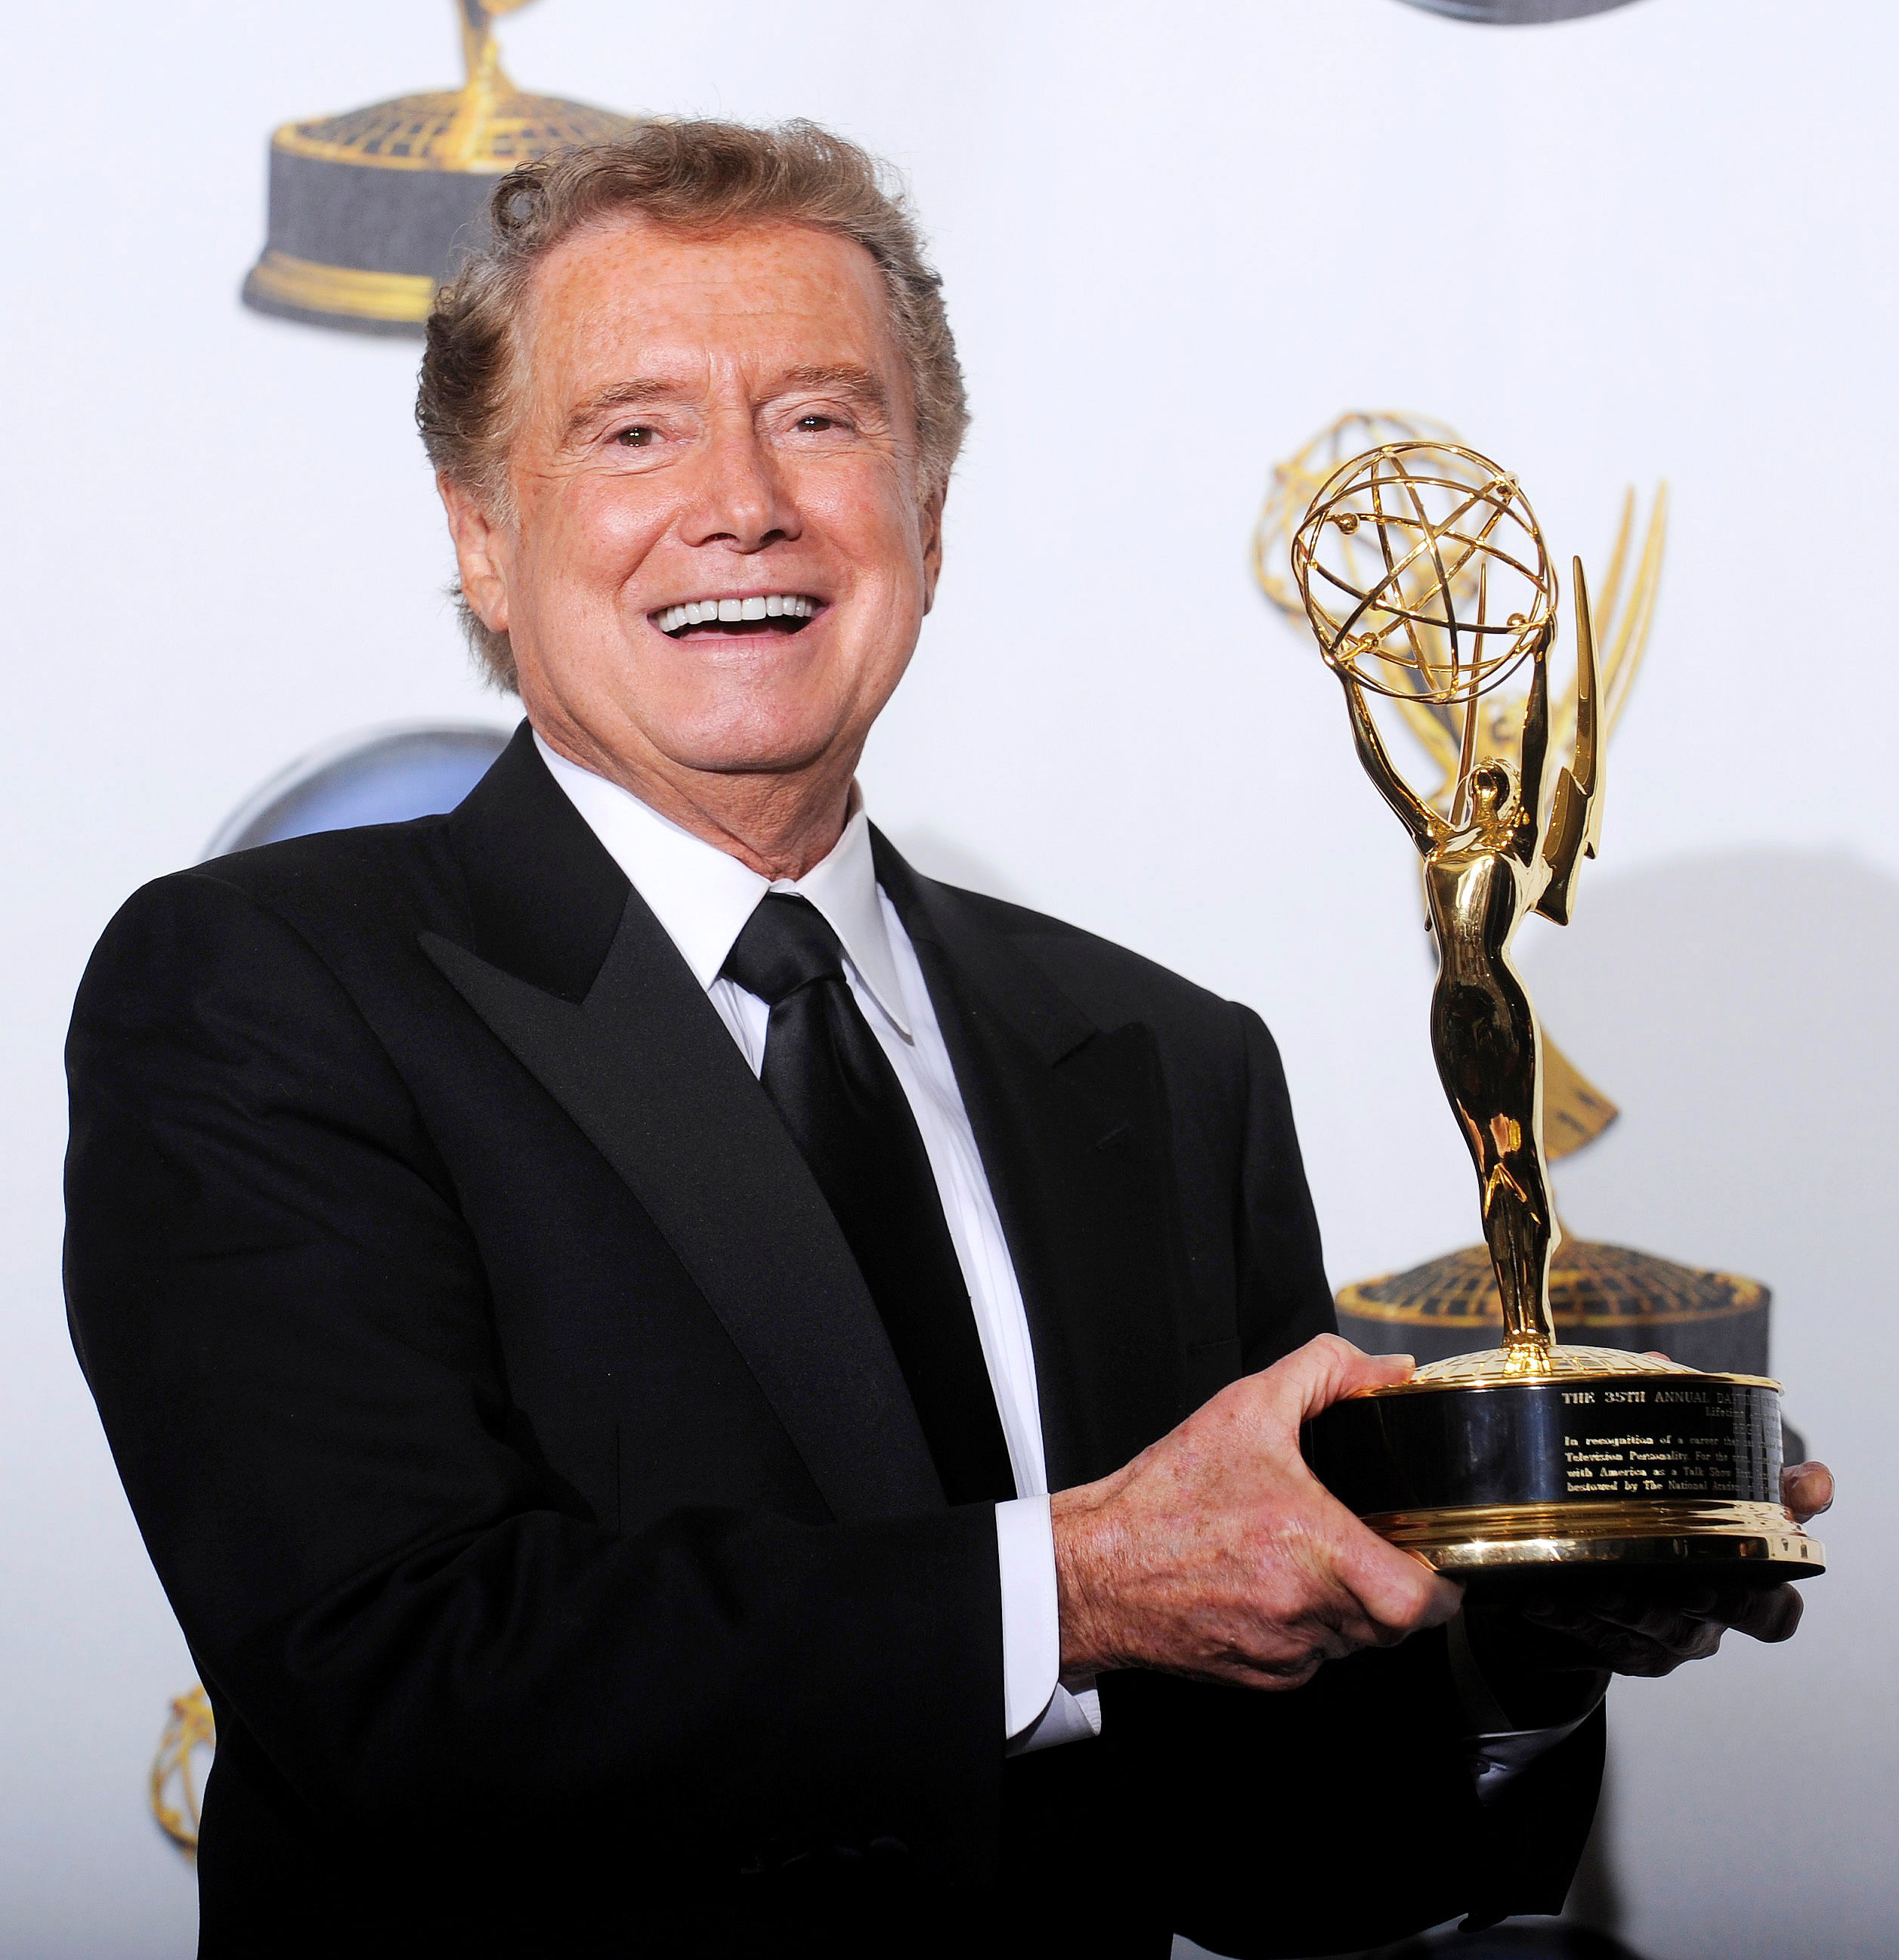 Regis Philbin poses with his lifetime achievement award backstage at the 35th Annual Daytime Emmy Awards at the Kodak theatre in Hollywood, California June 20, 2008. Credit: REUTERS File Photo